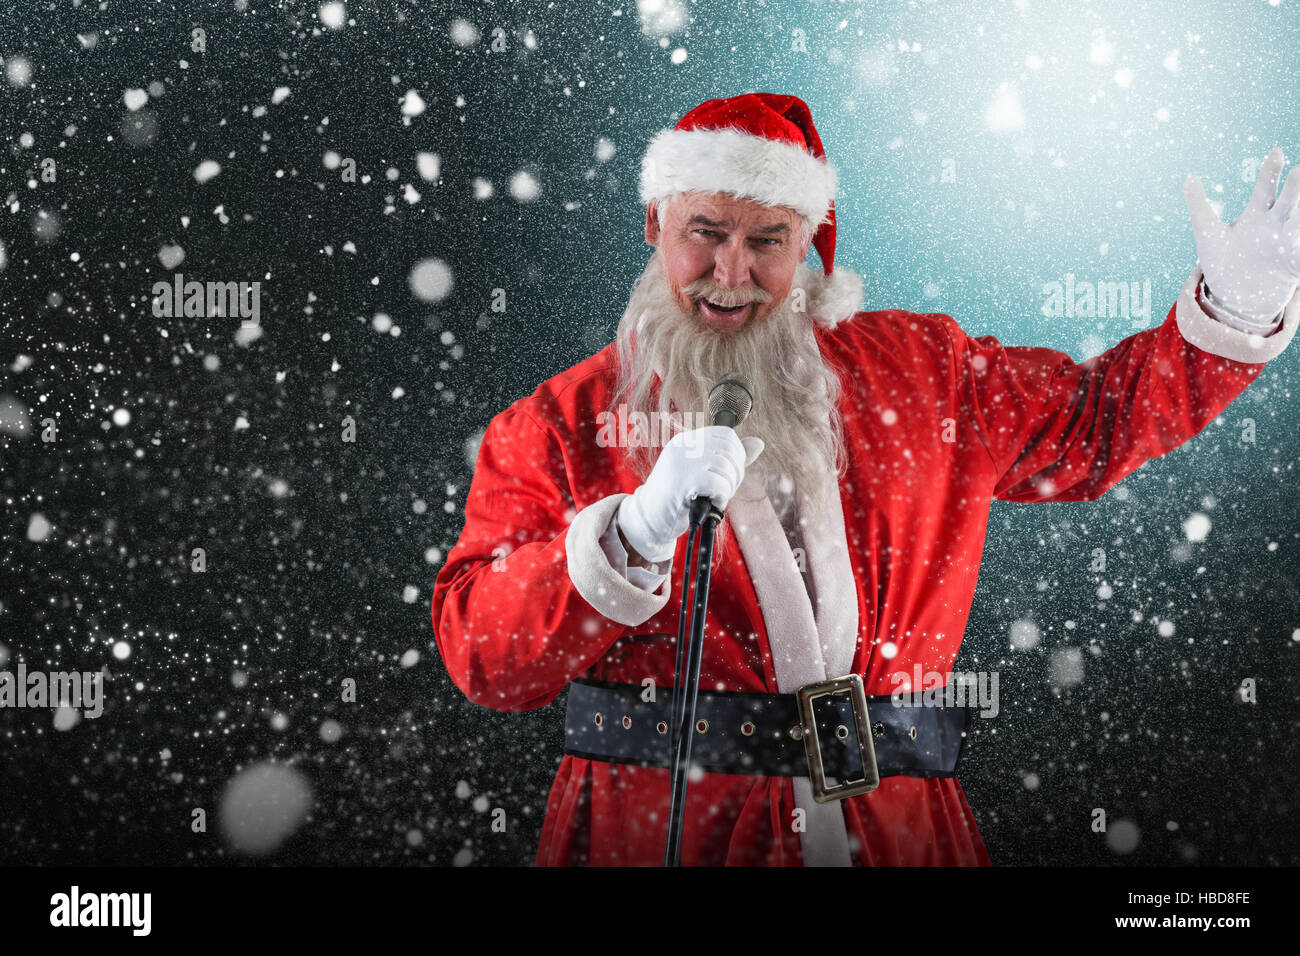 Composite image of portrait of santa claus singing christmas songs Stock Photo